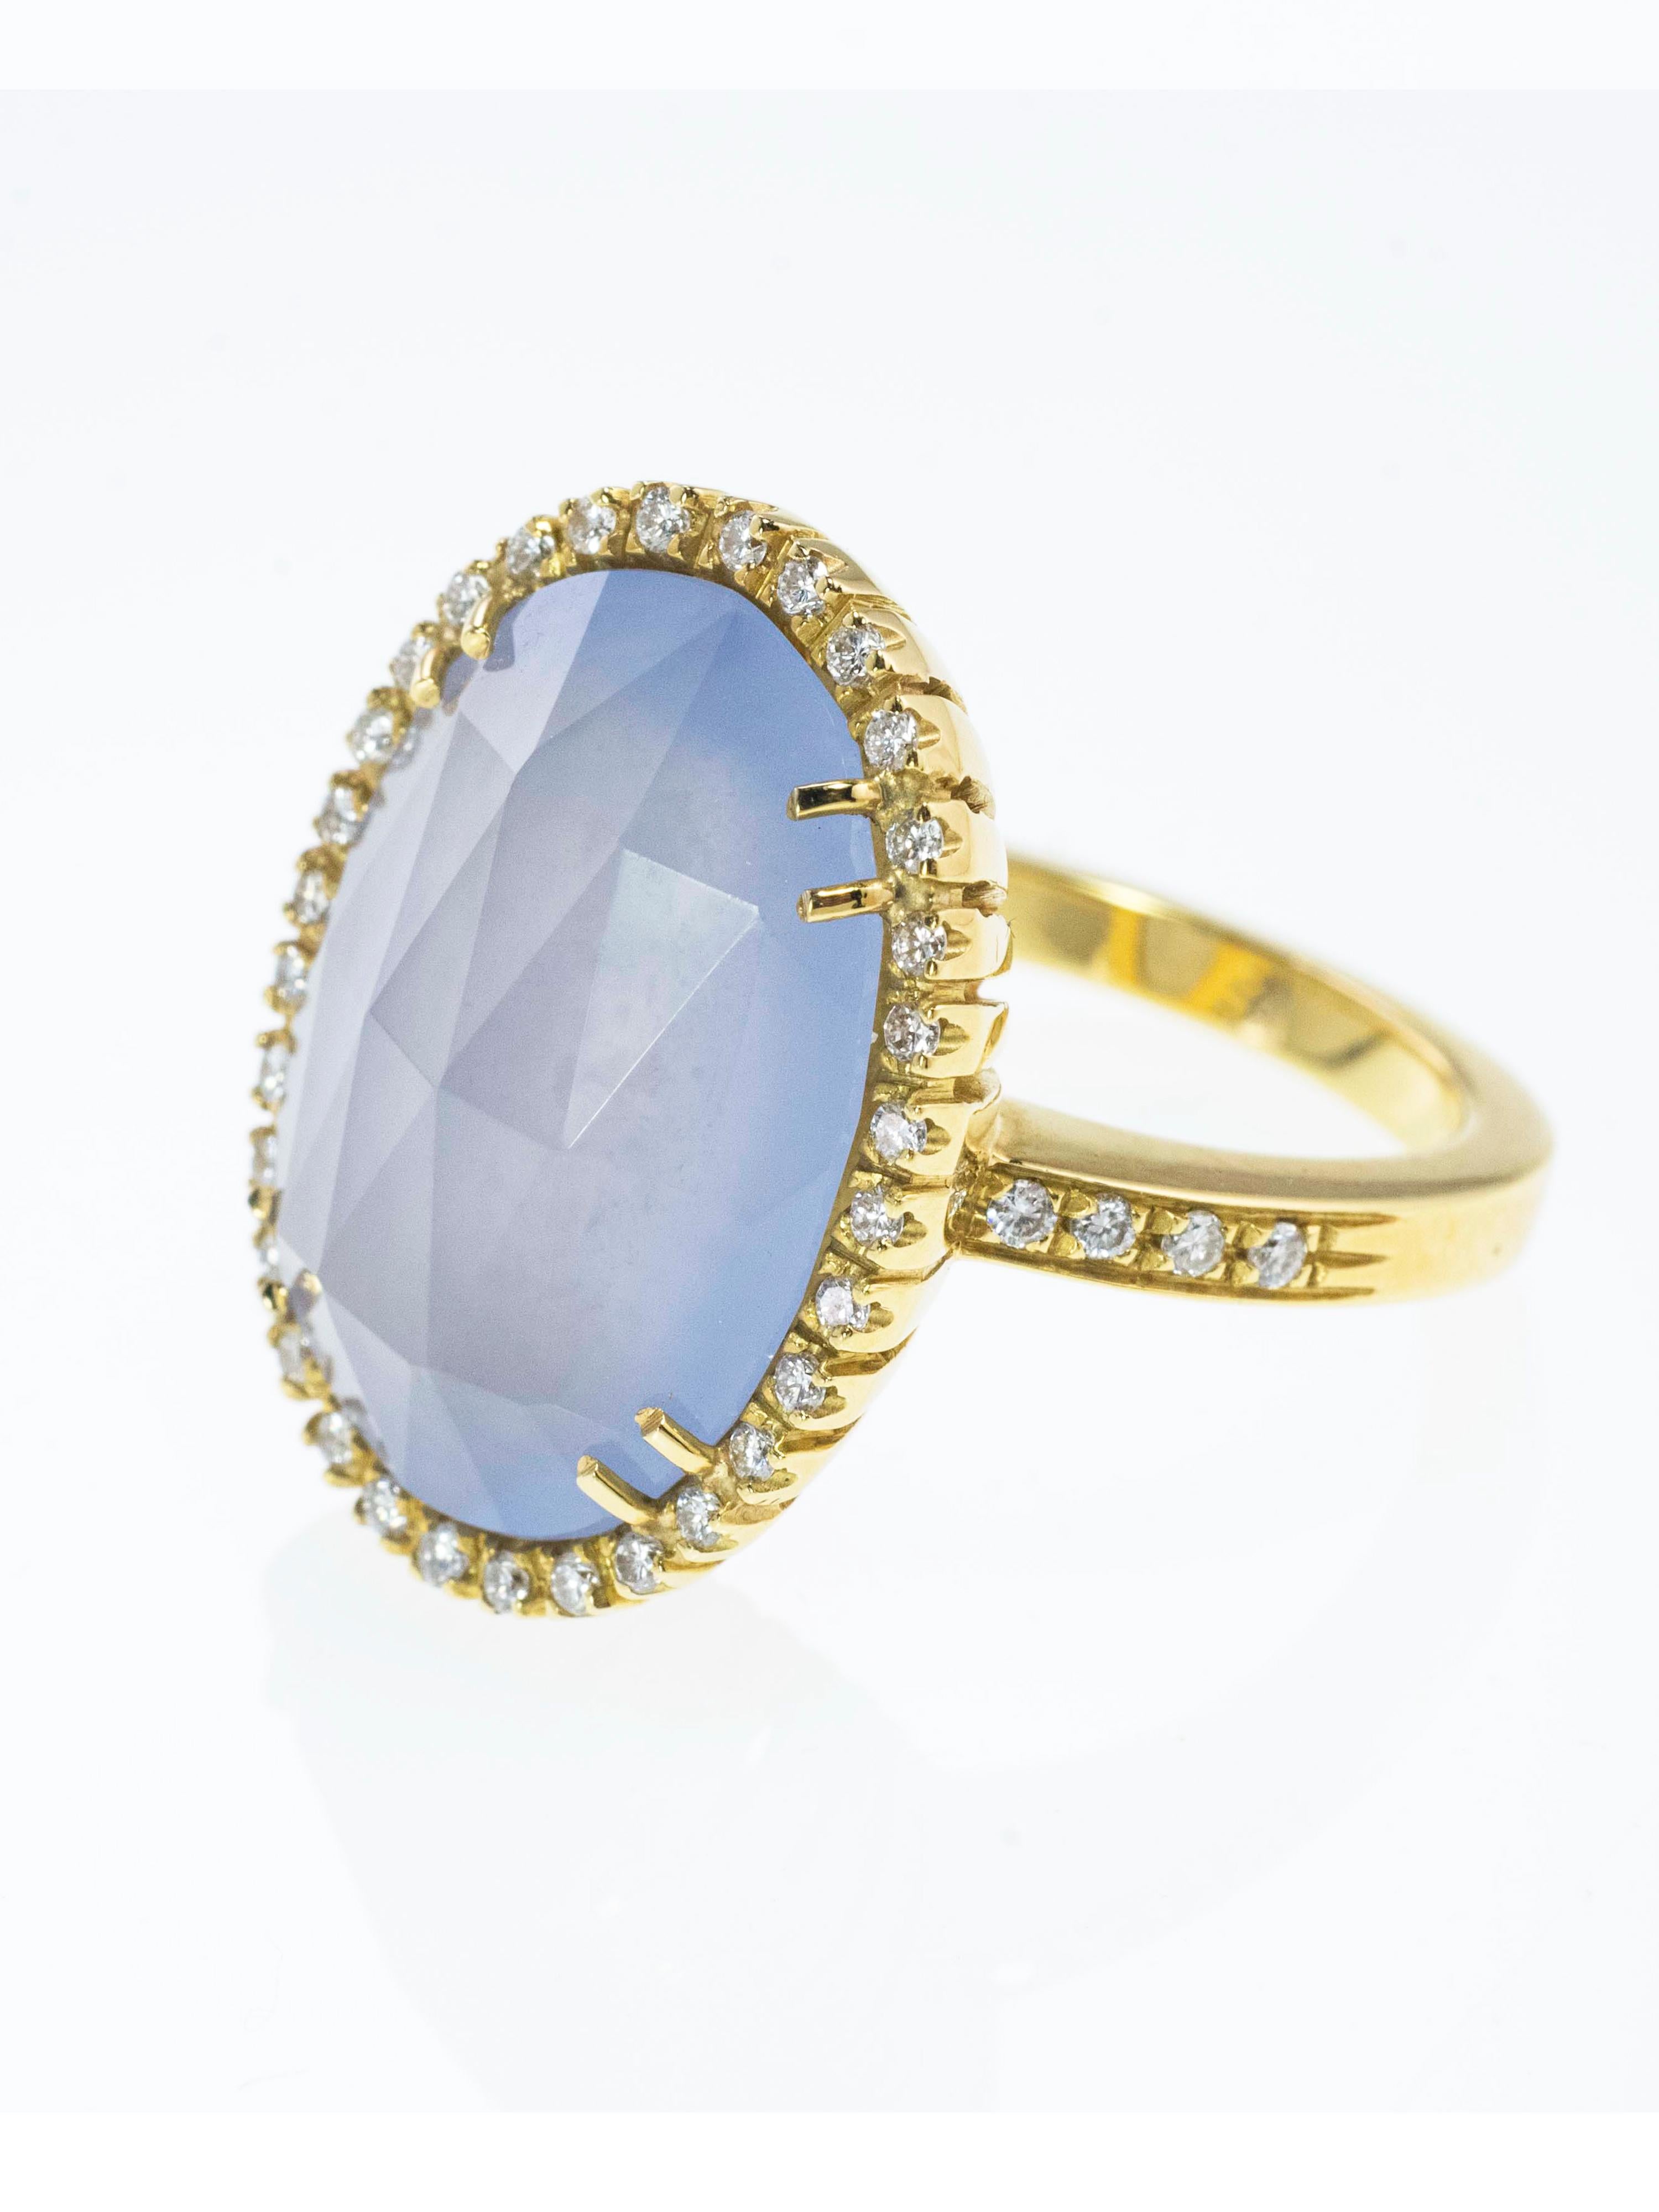 A solid 18 Kt yellow gold ring with a very elegant and classic design.
The faceted central Chalcedony has a beautiful light blue and purple color. 
It's enhanced by a Diamonds frame. these are also placed  on the ring shank and weigh in total ct